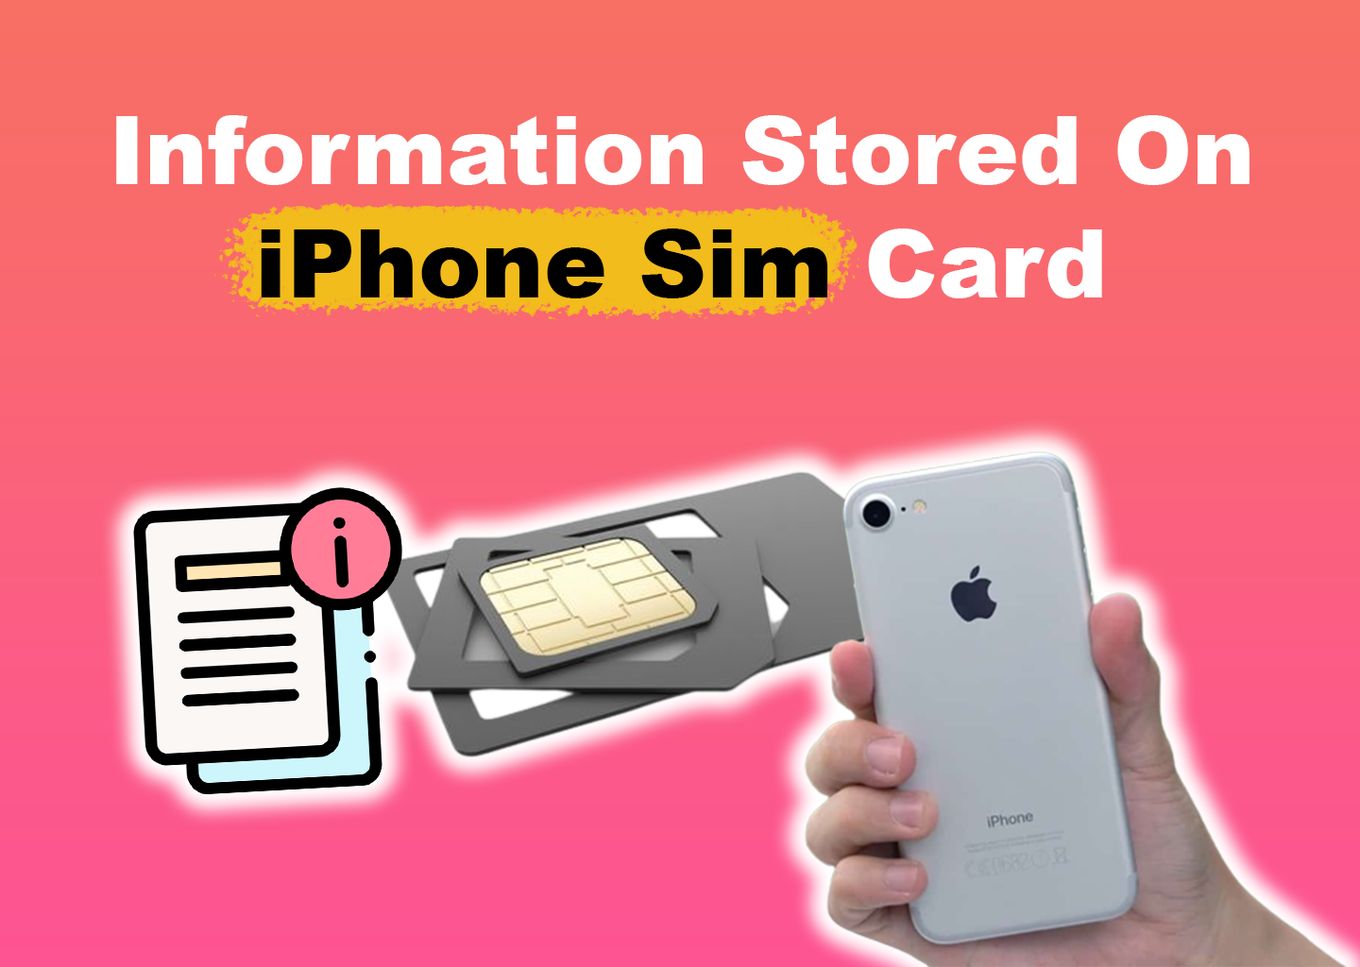 What Information is Stored on an iPhone SIM Card? [Explained] - Alvaro  Trigo's Blog